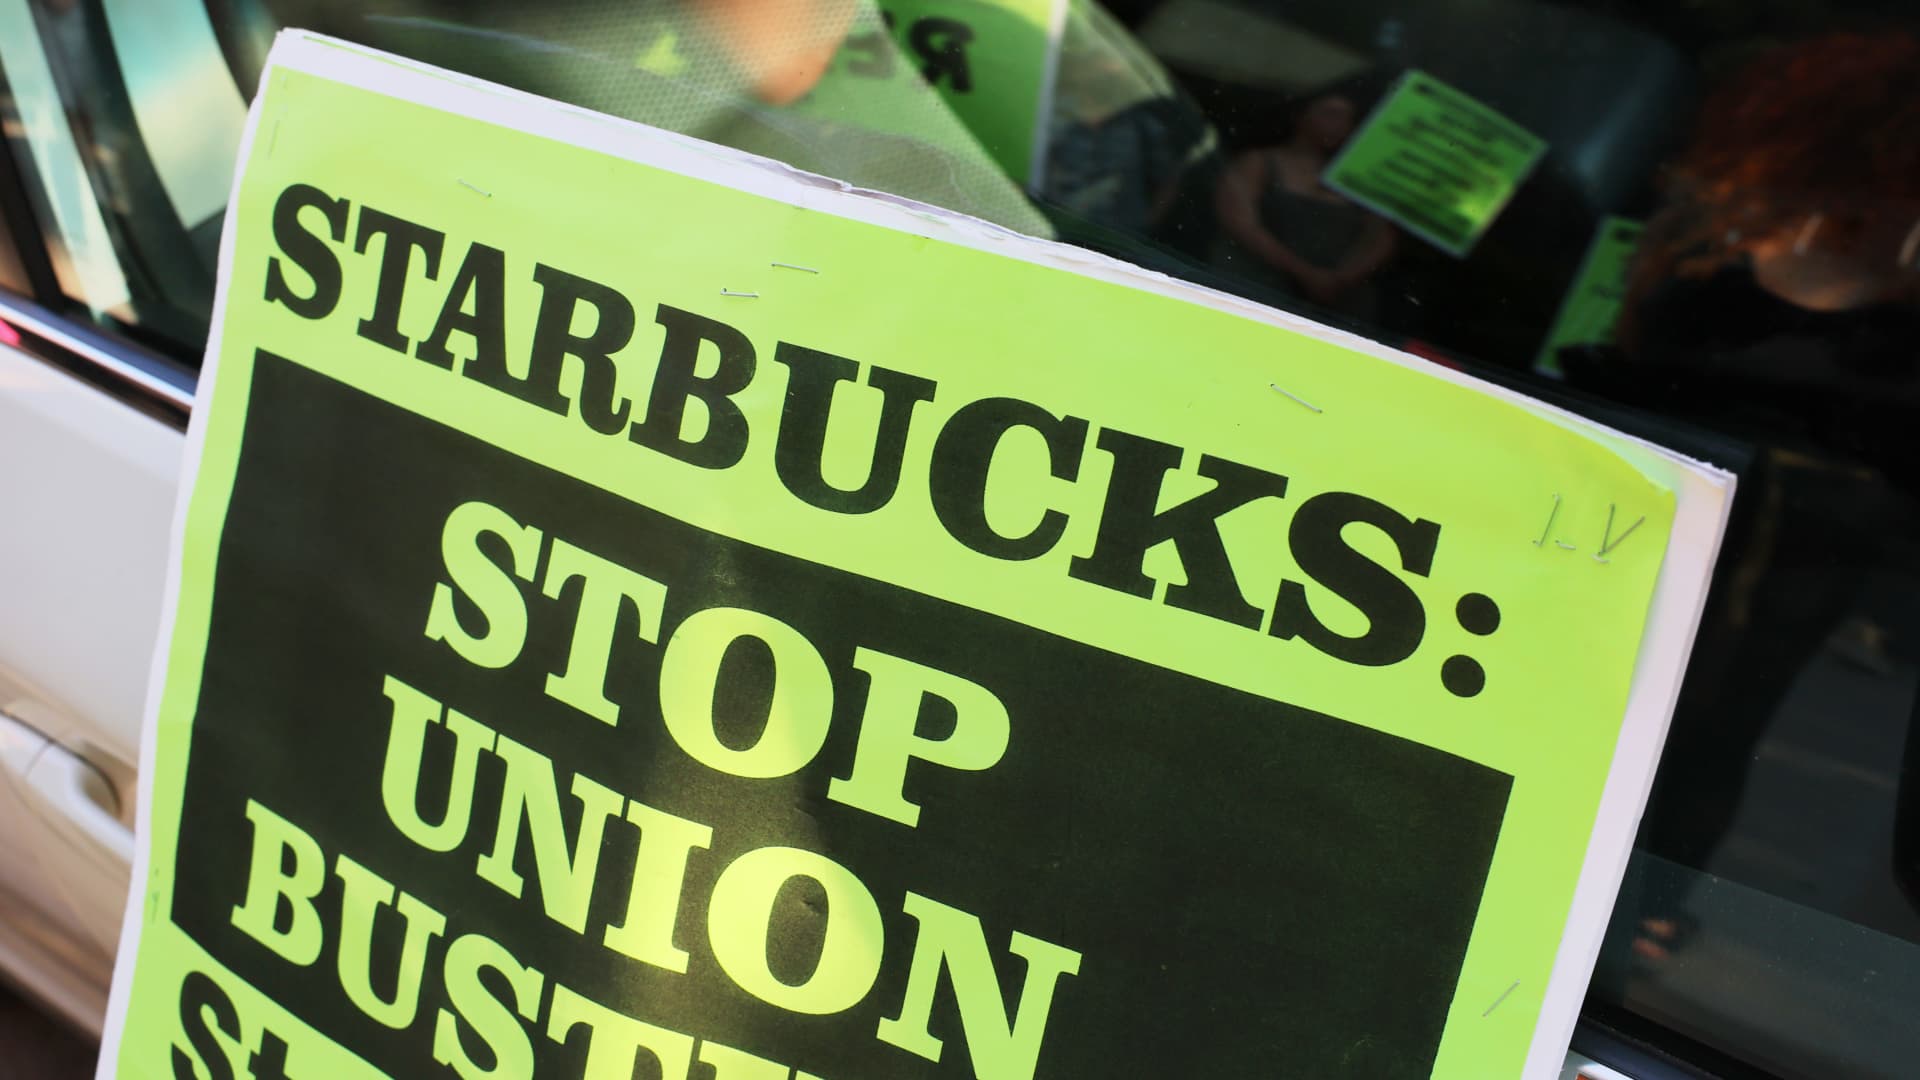 Starbucks asks labor board to suspend mail-in ballot union elections, alleging misconduct in voting process - CNBC